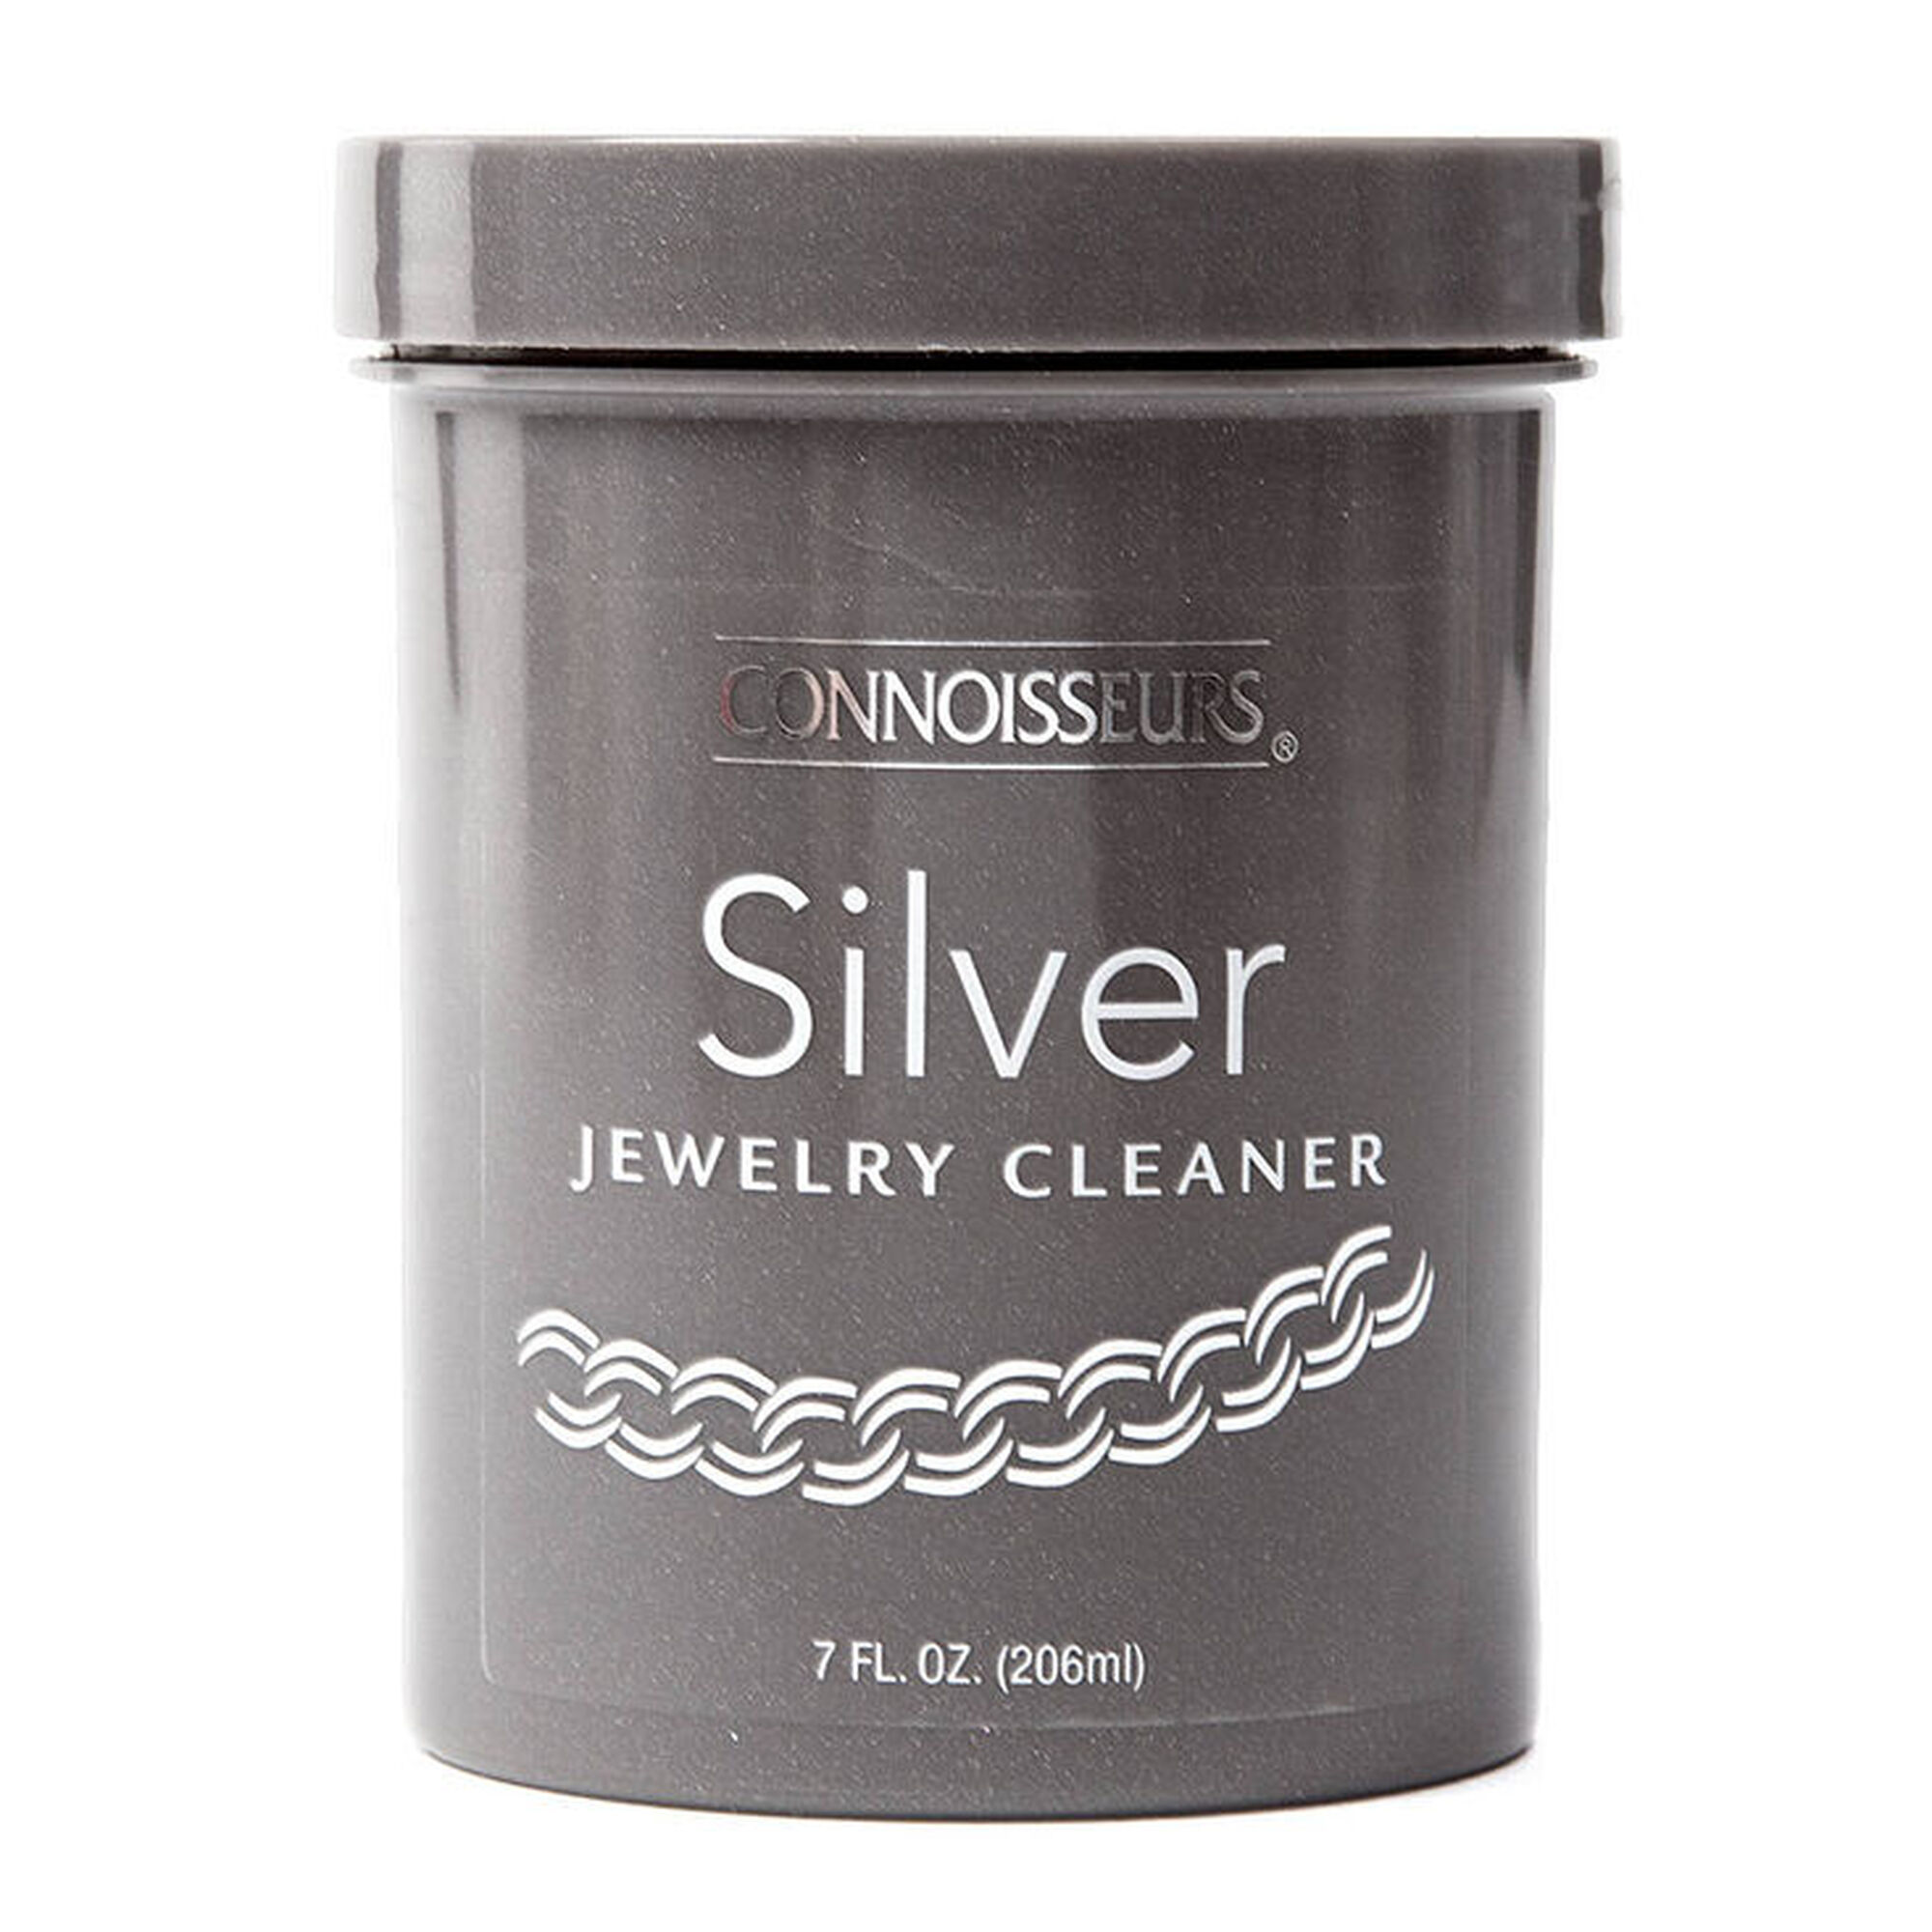 Connoisseurs Silver Jewelry Cleaner Agents Wash Oxidized Sterling